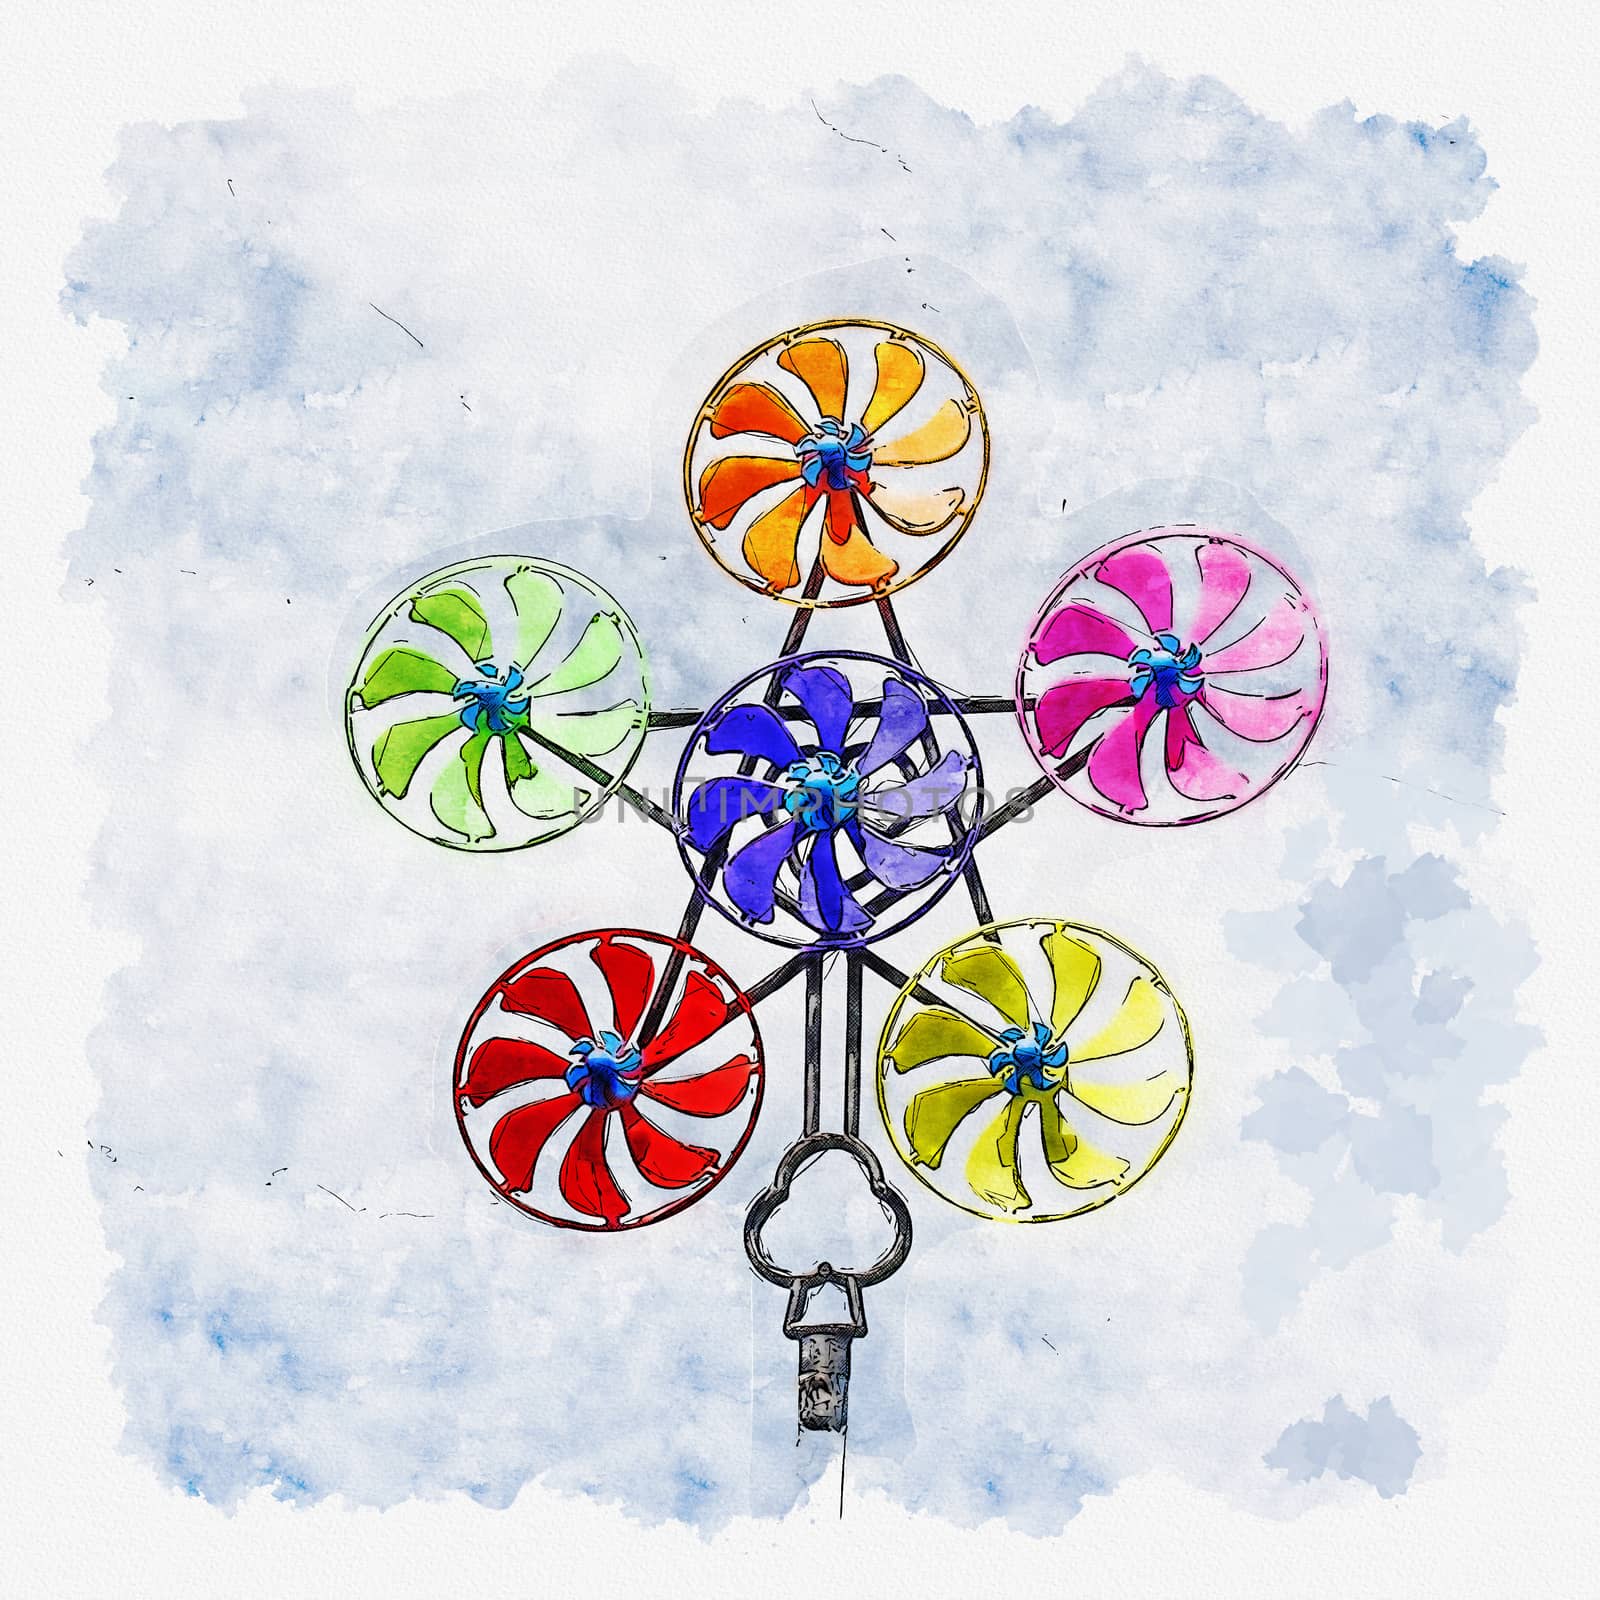 Illustration or watercolor paint of Colorful pinwheel against blue sky with clouds.